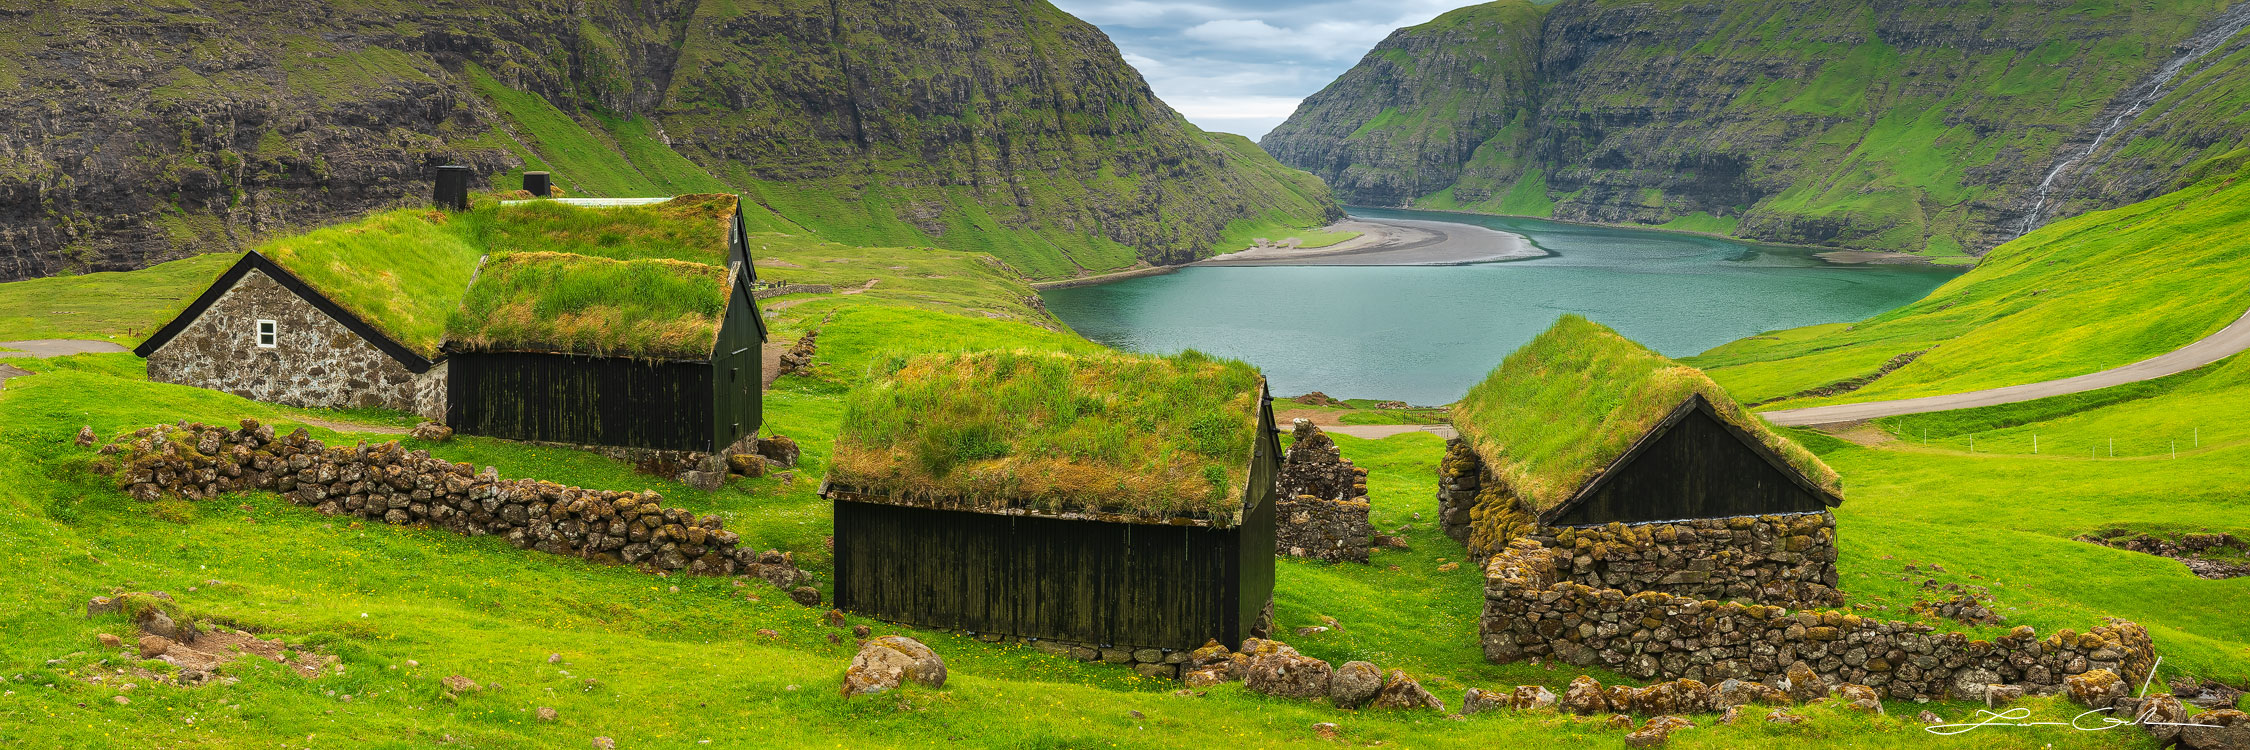 Grass roof houses surrounded by lush meados and mountains with a lake and a waterfall in the distance - Faroe Islands - Gintchin Fine Art